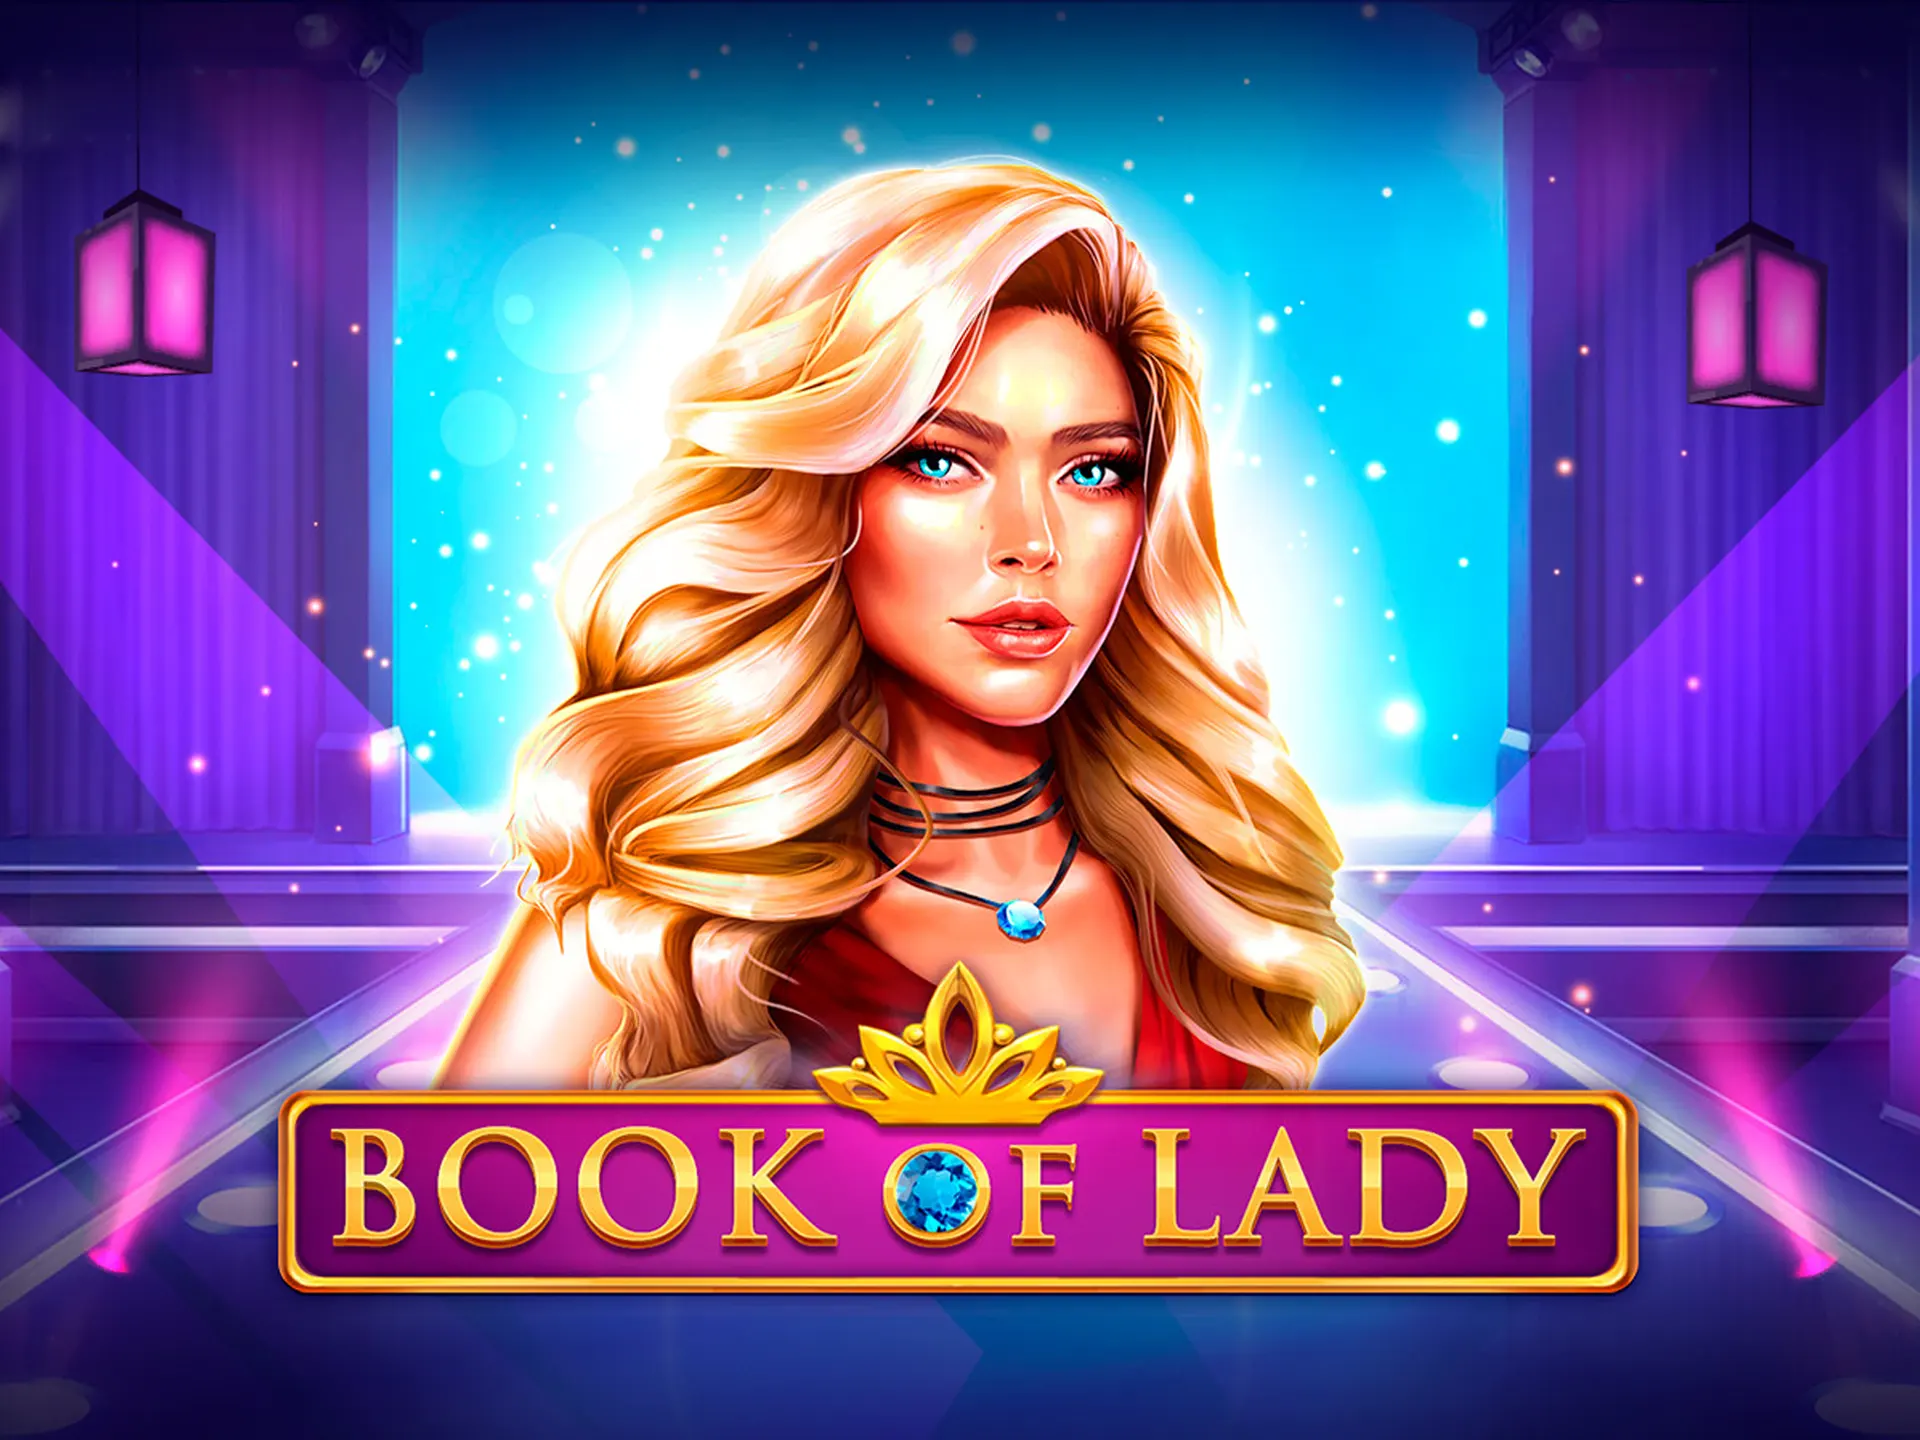 Win big amount of money playing Book of Lady slot.